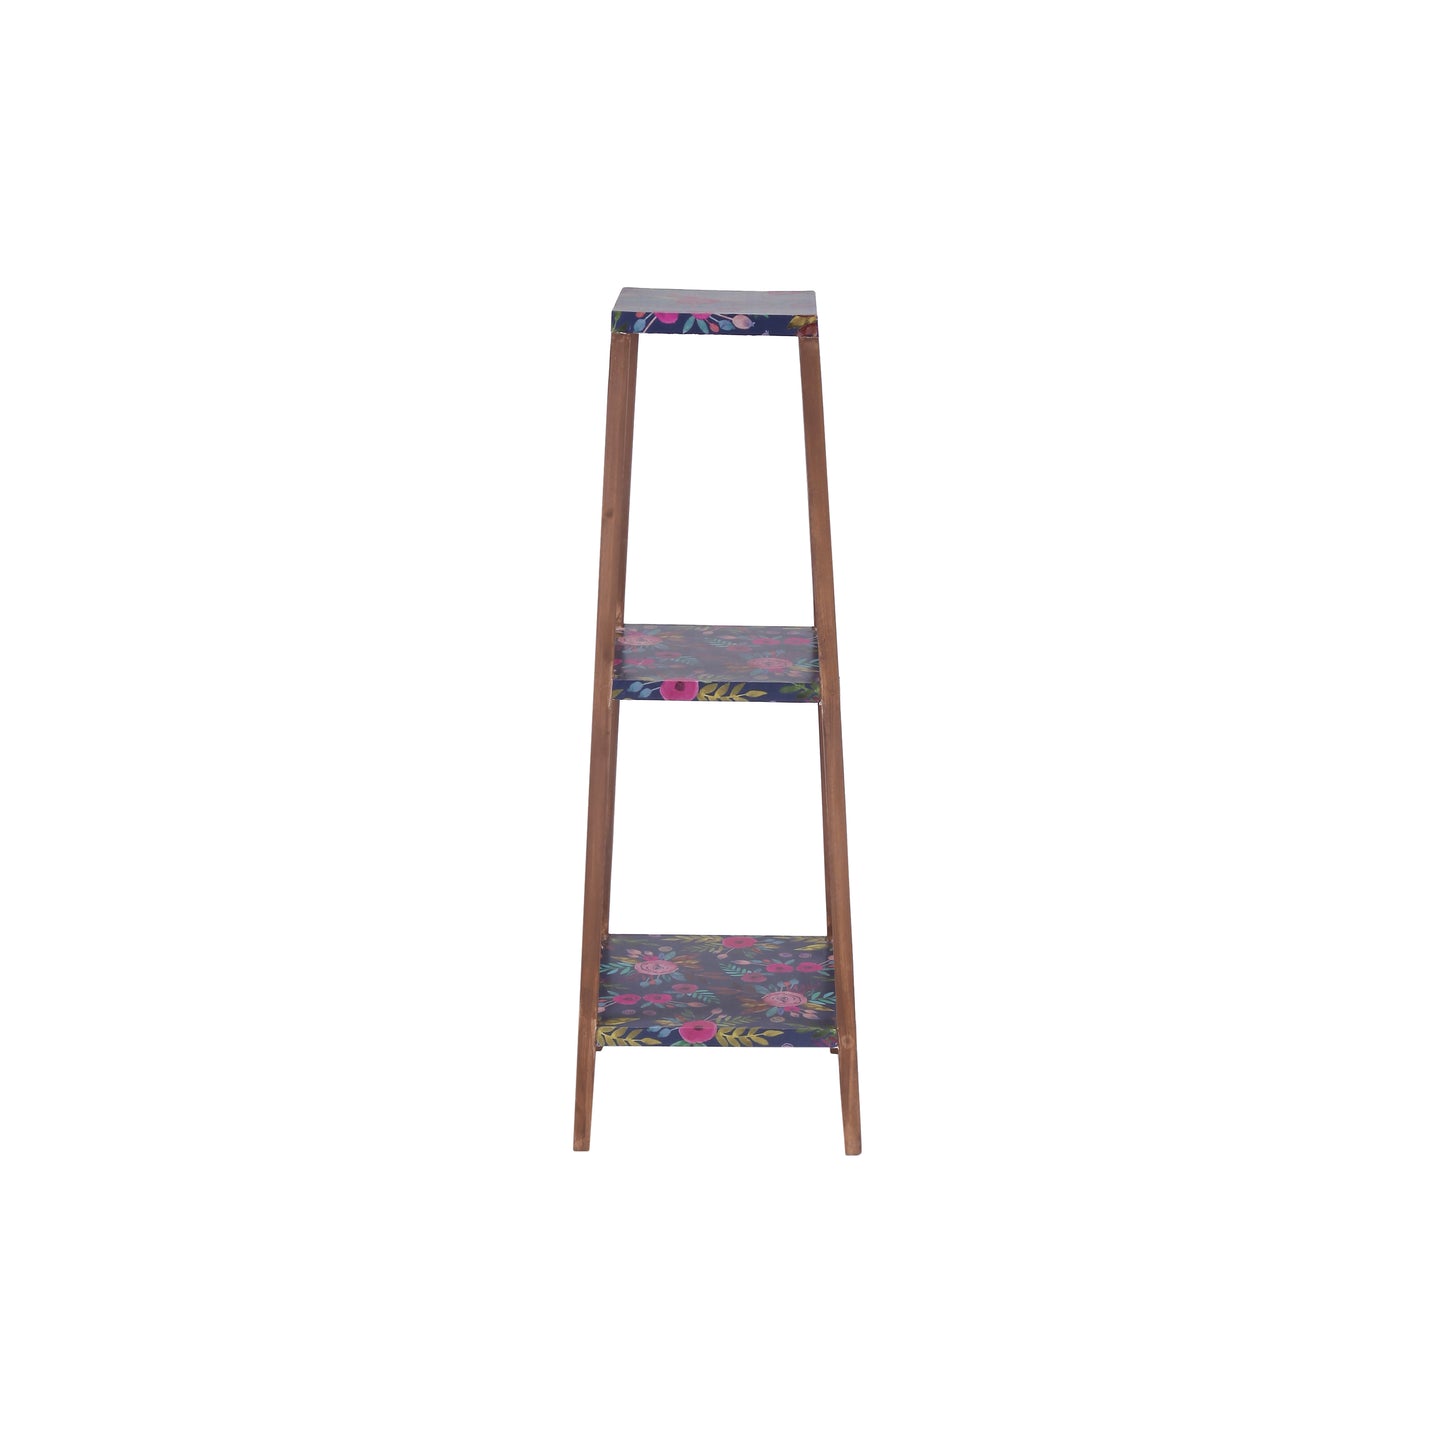 A Tiny Mistake Square Four Legged Tapering Three Tier Decorative Stand (Three Tiers) (Floral Base with Dark Legs)